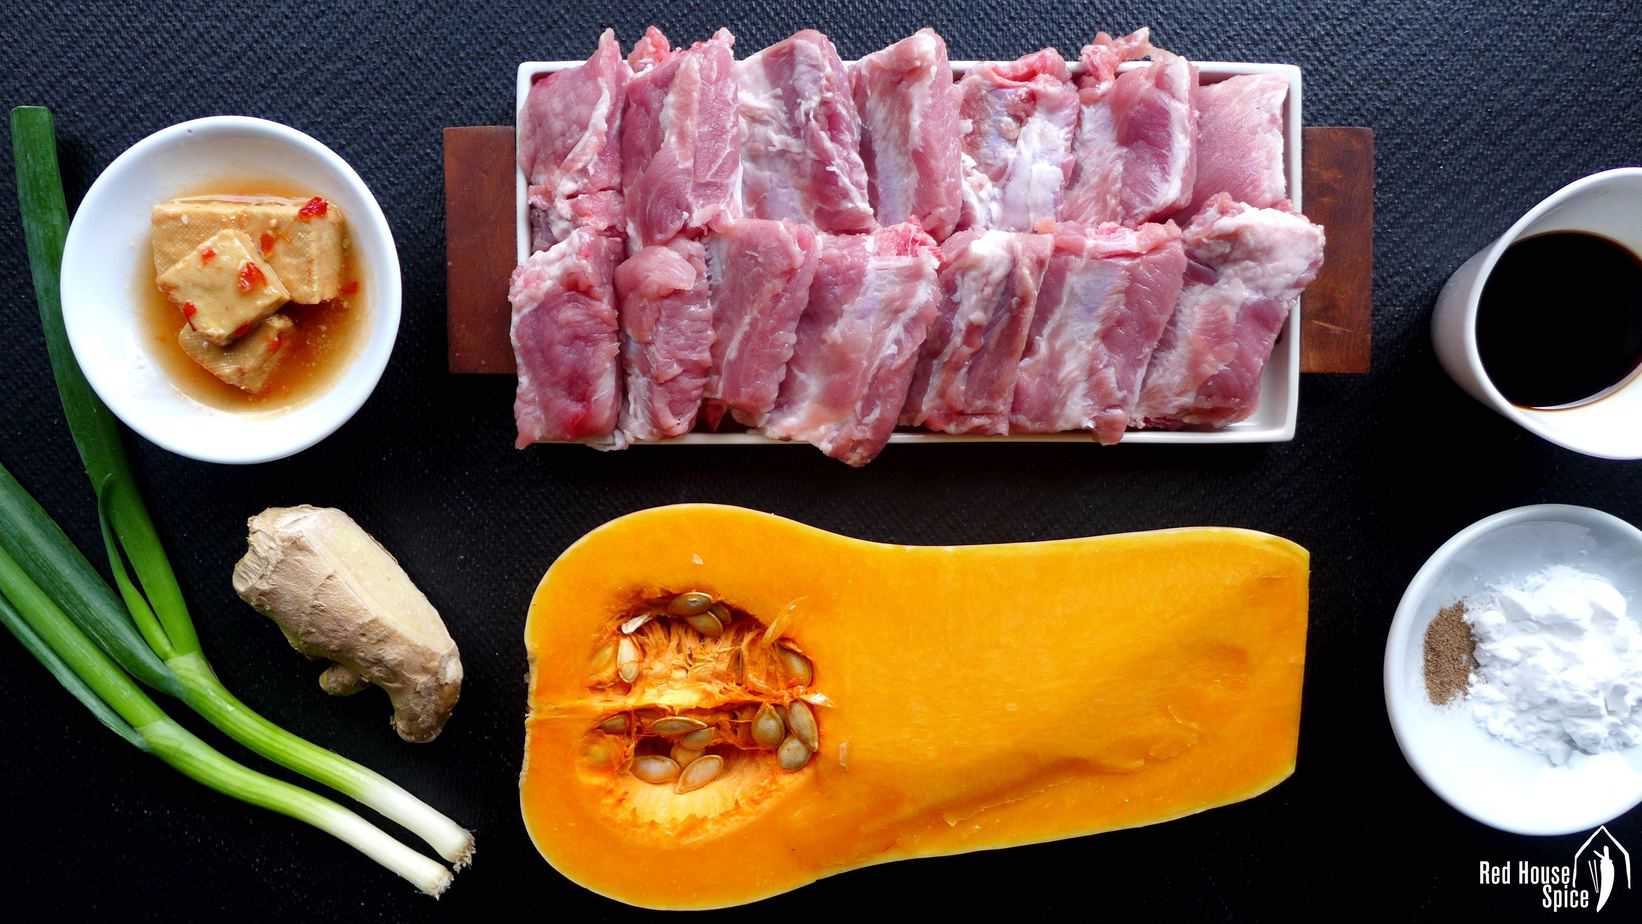 Seasoned with “soy cheese”, these steamed pork ribs leave a unique aroma in your mouth. Butternut squash underneath collects all the flavour from the meat.